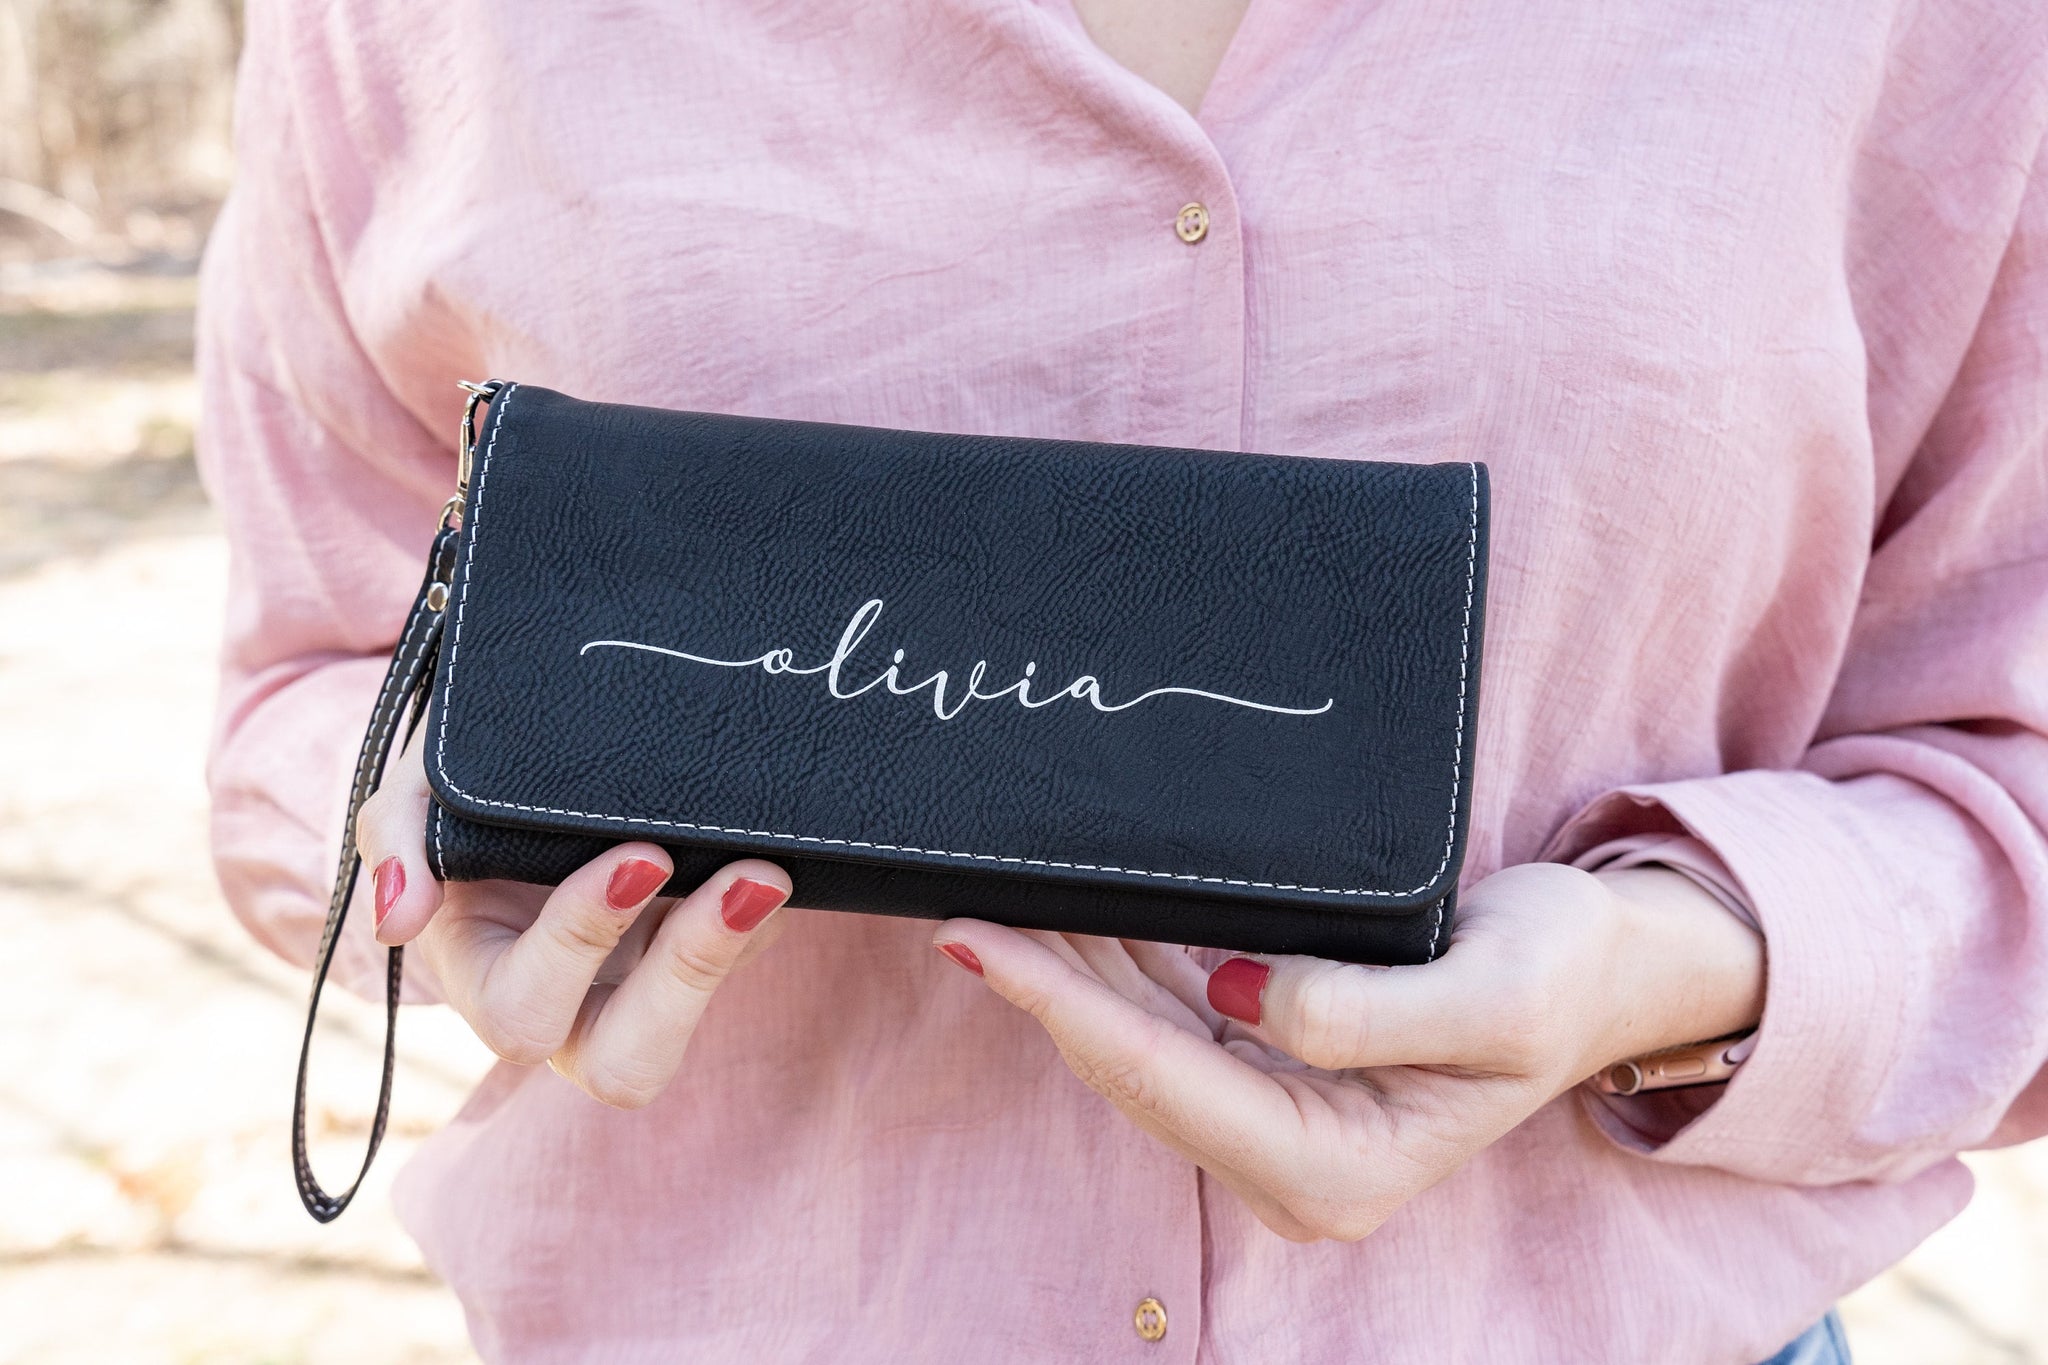 Stella Women's Wallet, Vegan Leather Wallet, Personalized Gifts for Her, Custom Engraved Purse